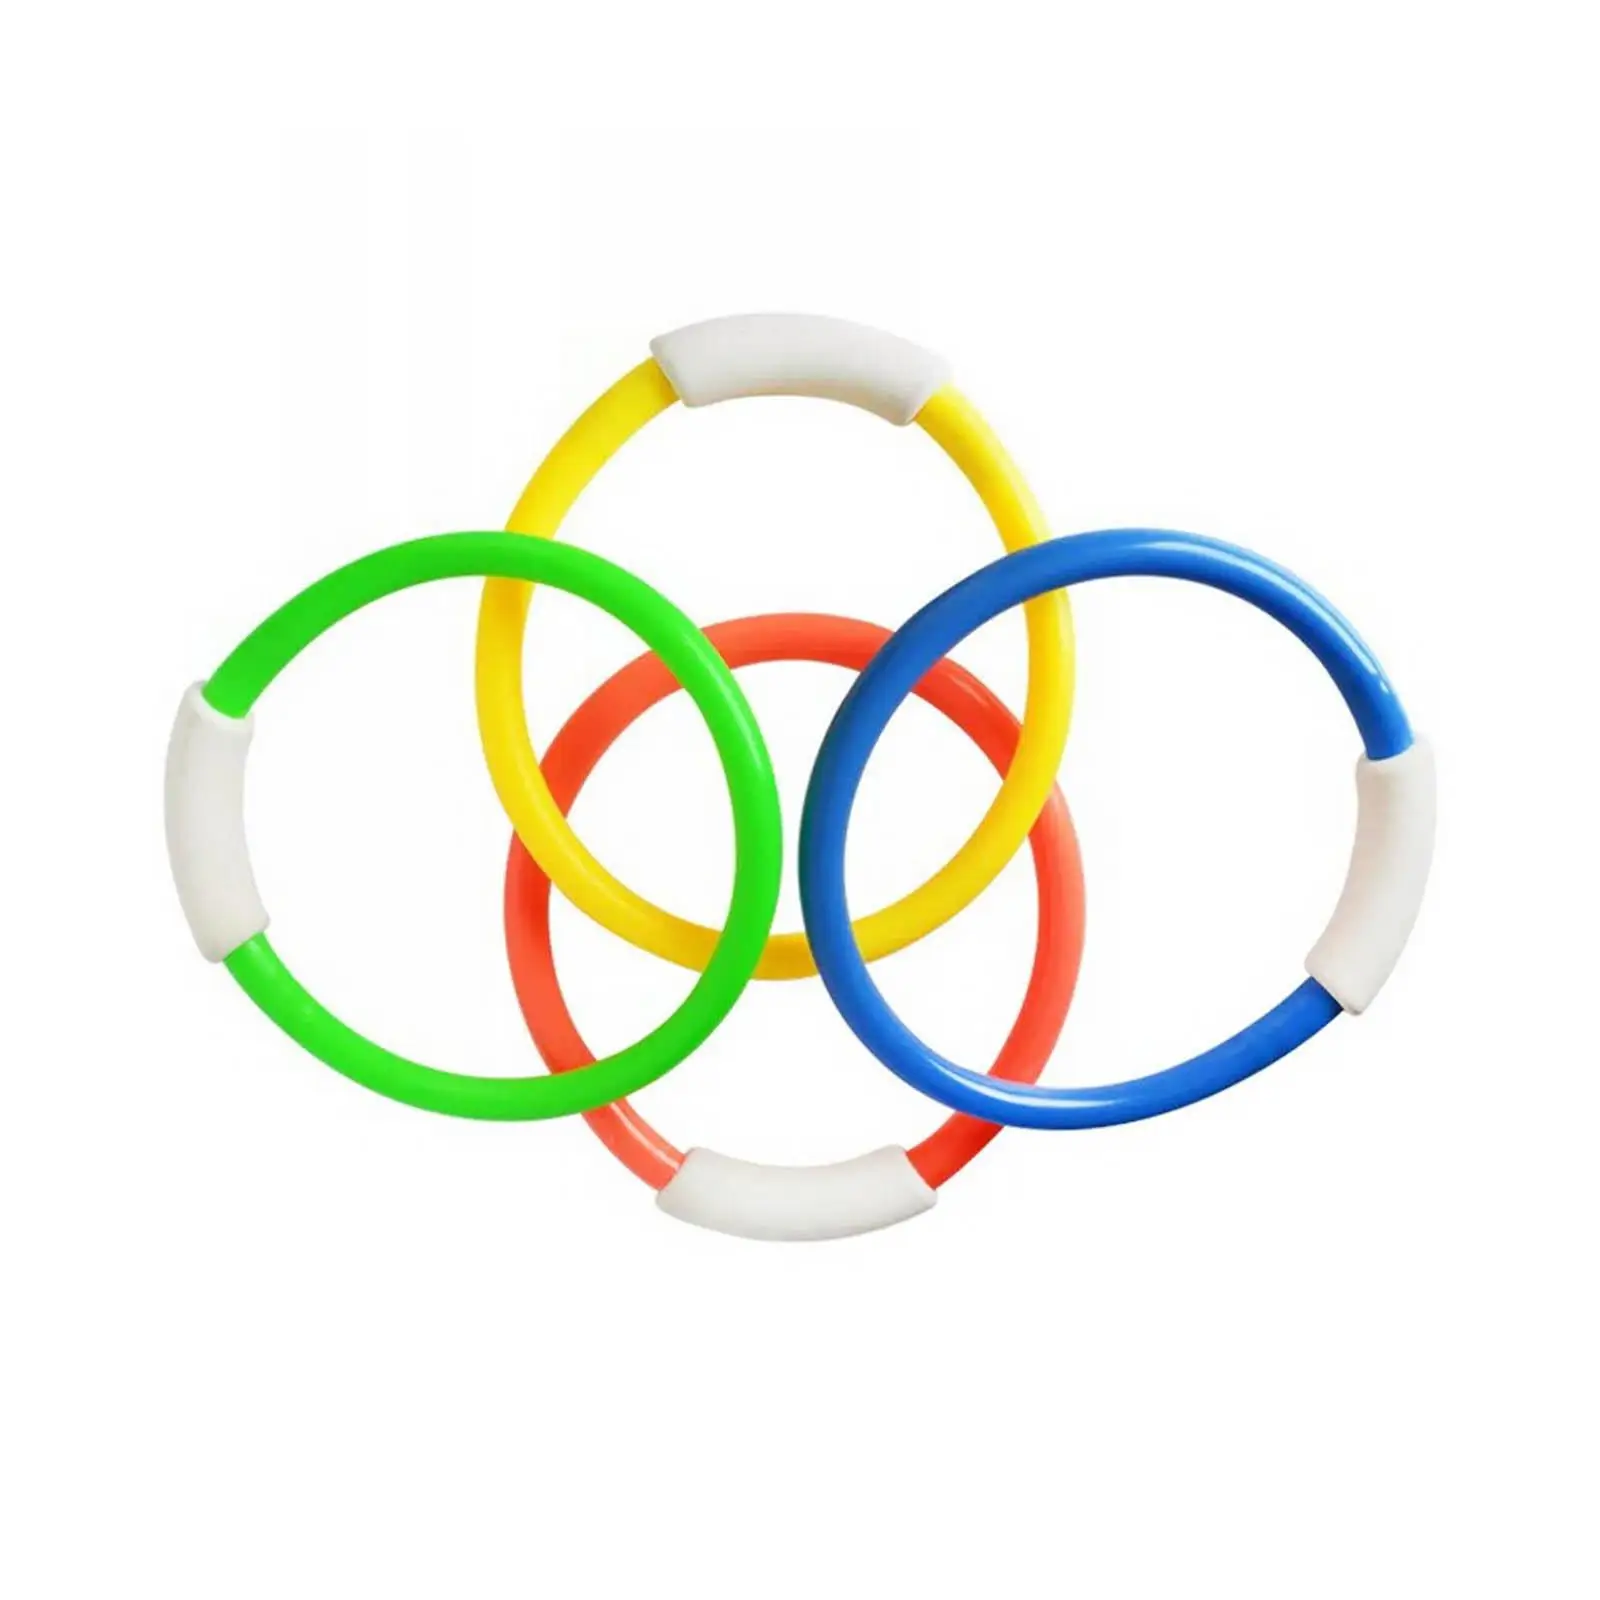 4x Diving Rings for Pool Multi Toy Water Toys for Kids Underwater Dive Rings for Playing Diving Swimming Beach Summer